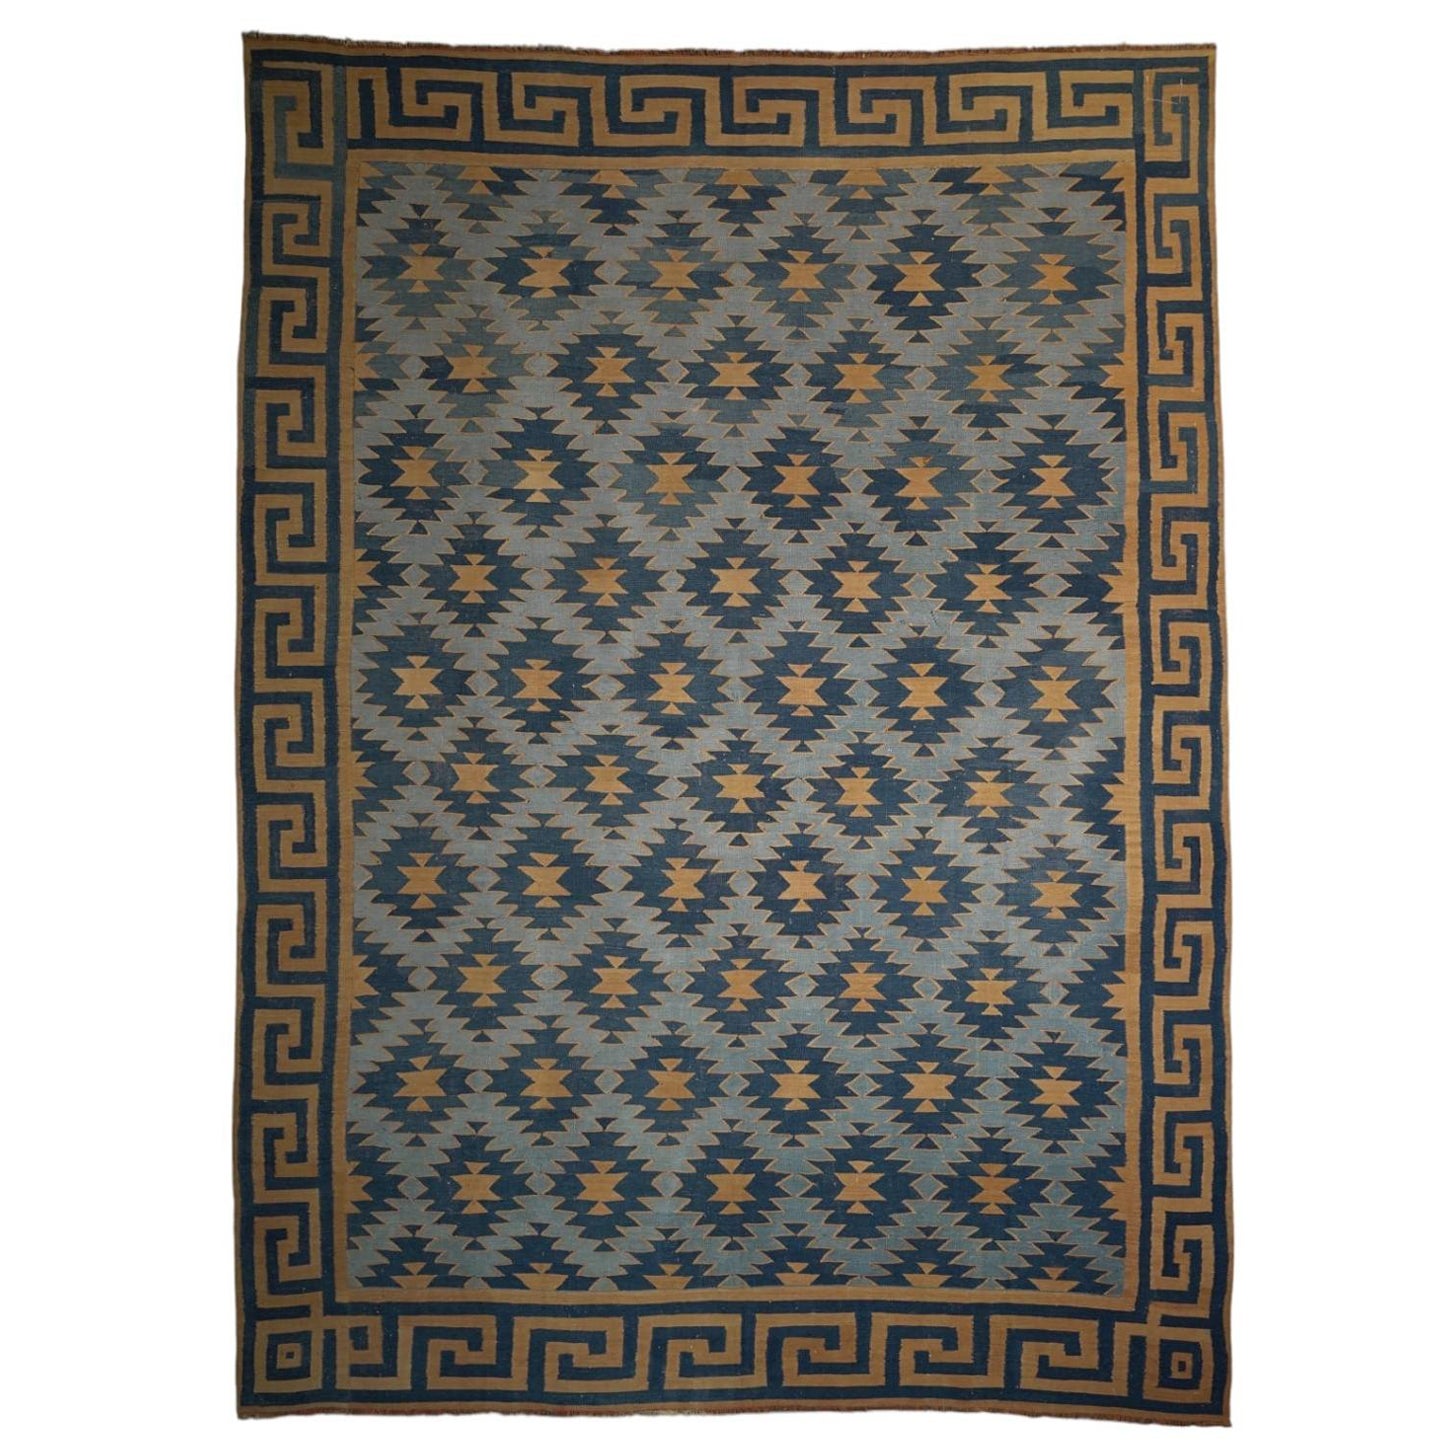 Vintage Dhurrie Rug in Blue, with Geometric Patterns, from Rug & Kilim For Sale